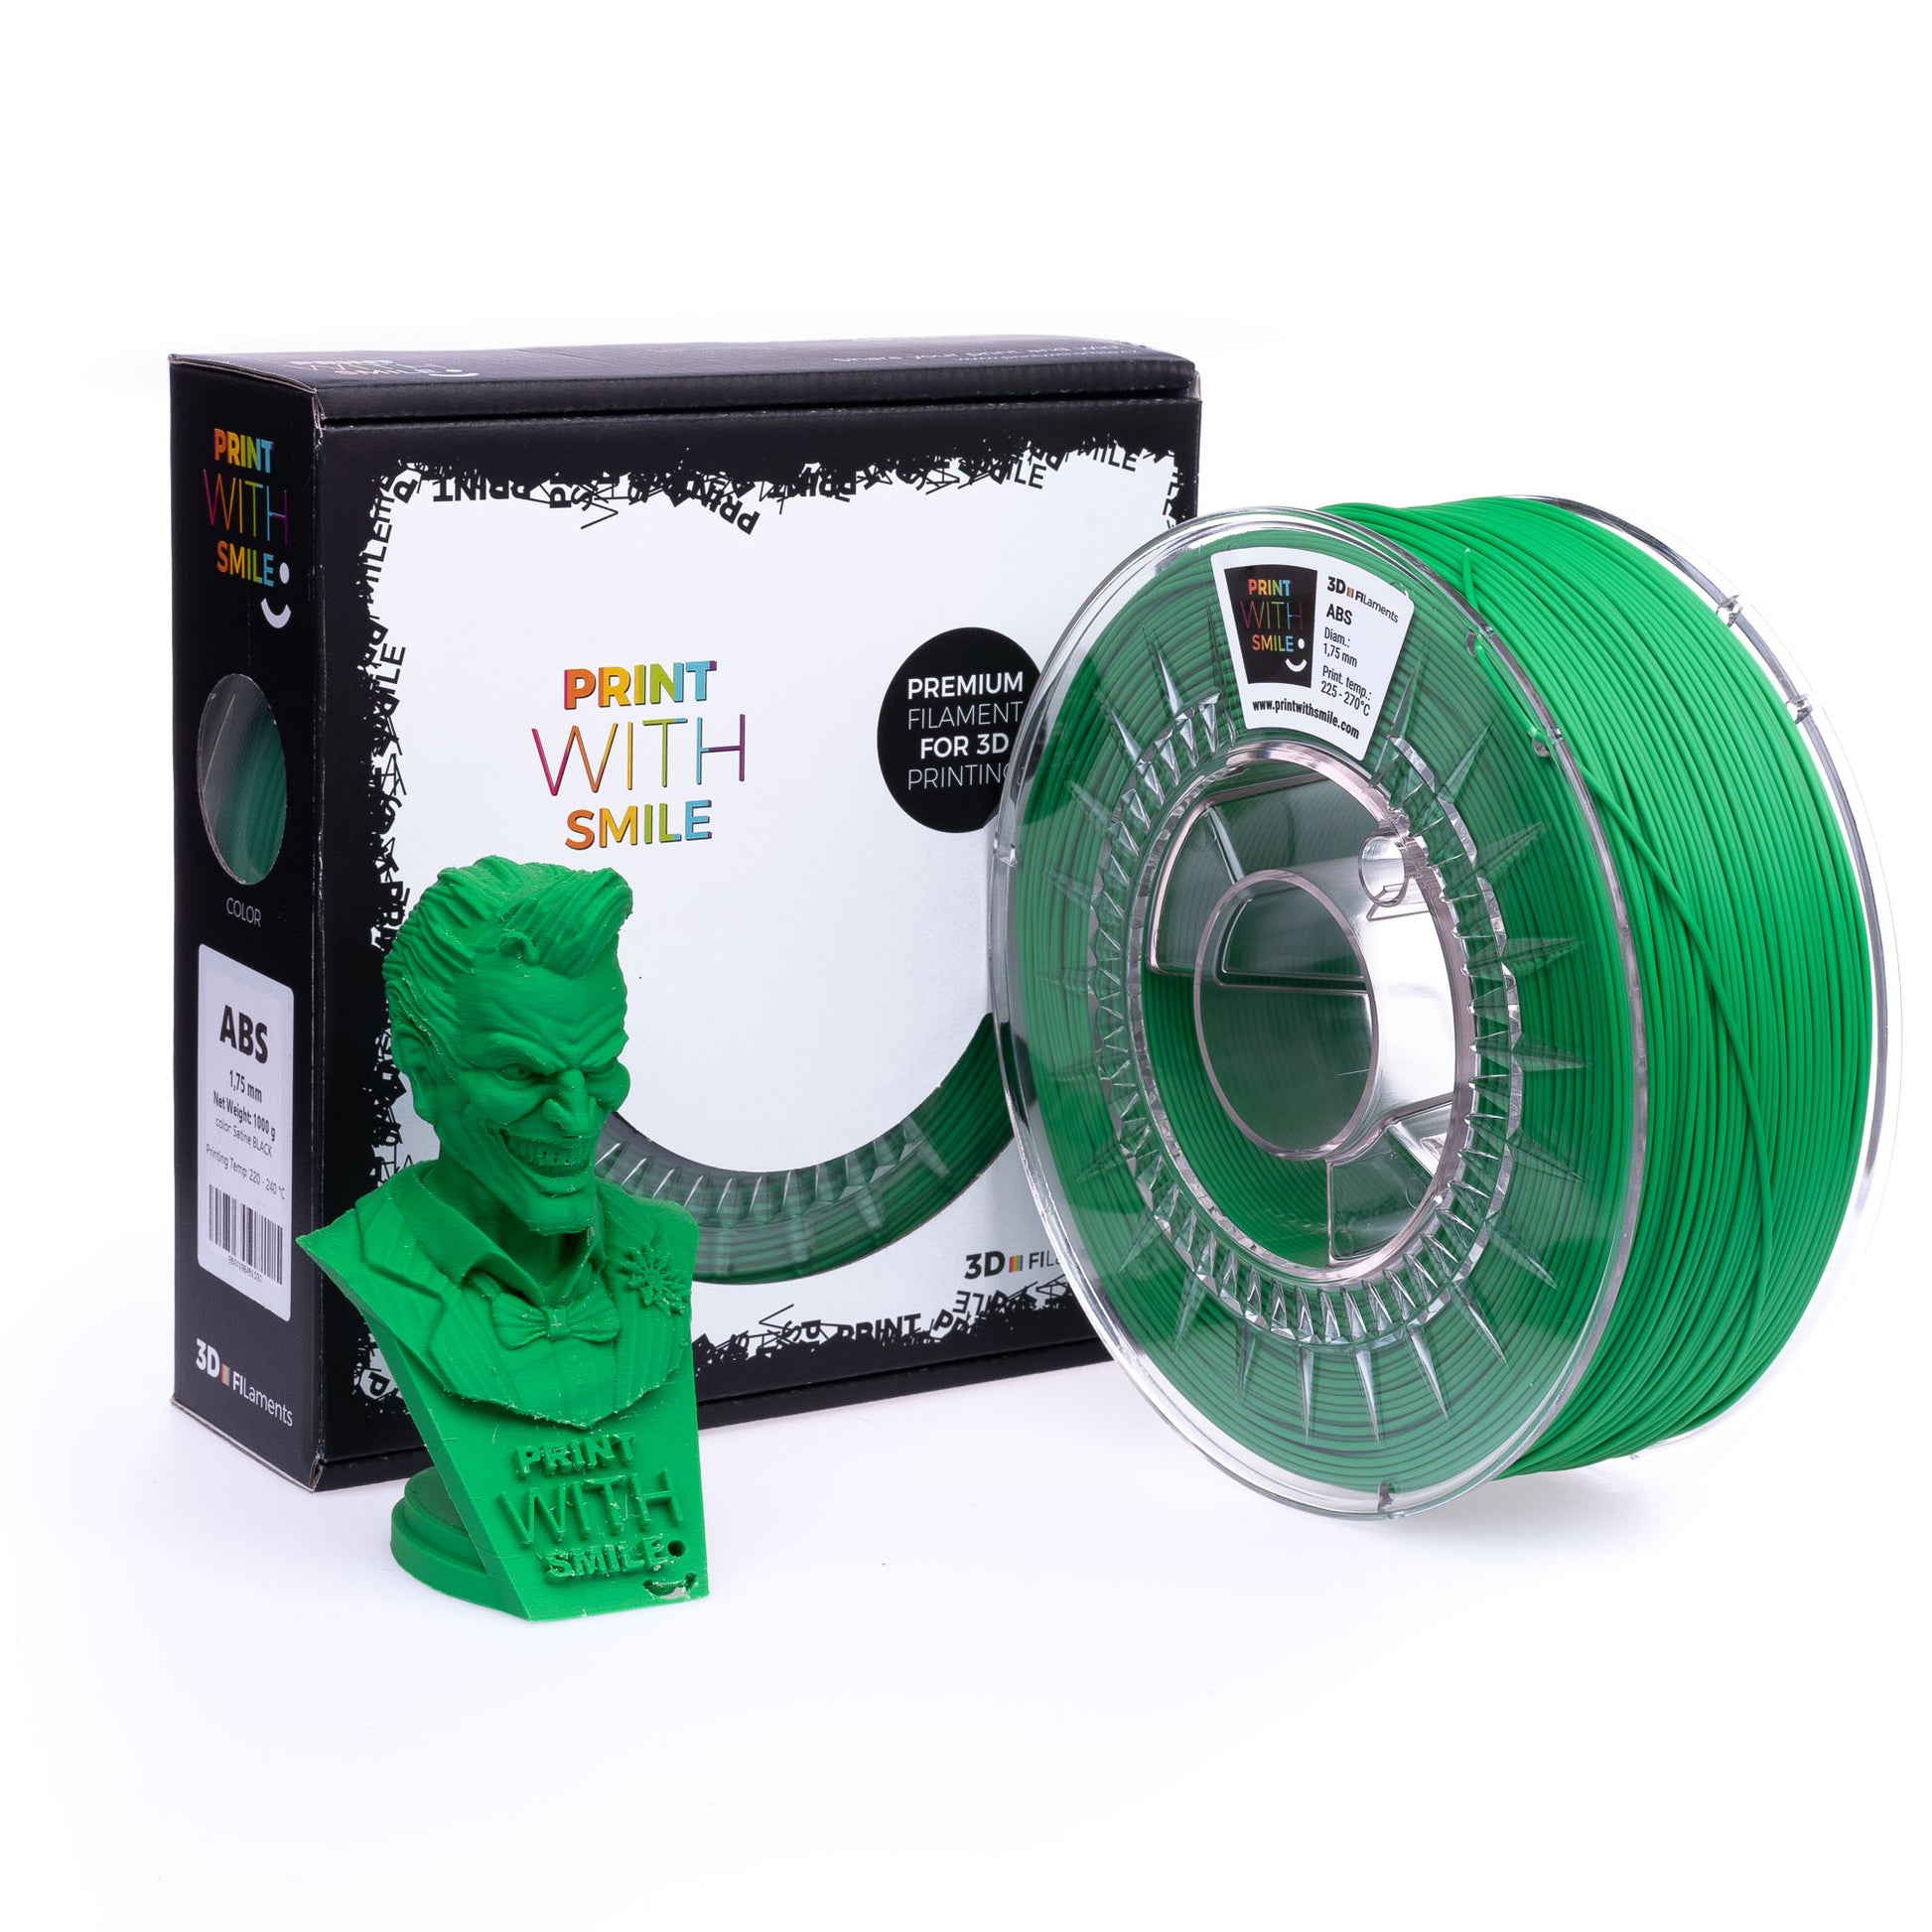 Quality ABS Filaments from Czech producer PRINT WITH SMILE. – PBT Market